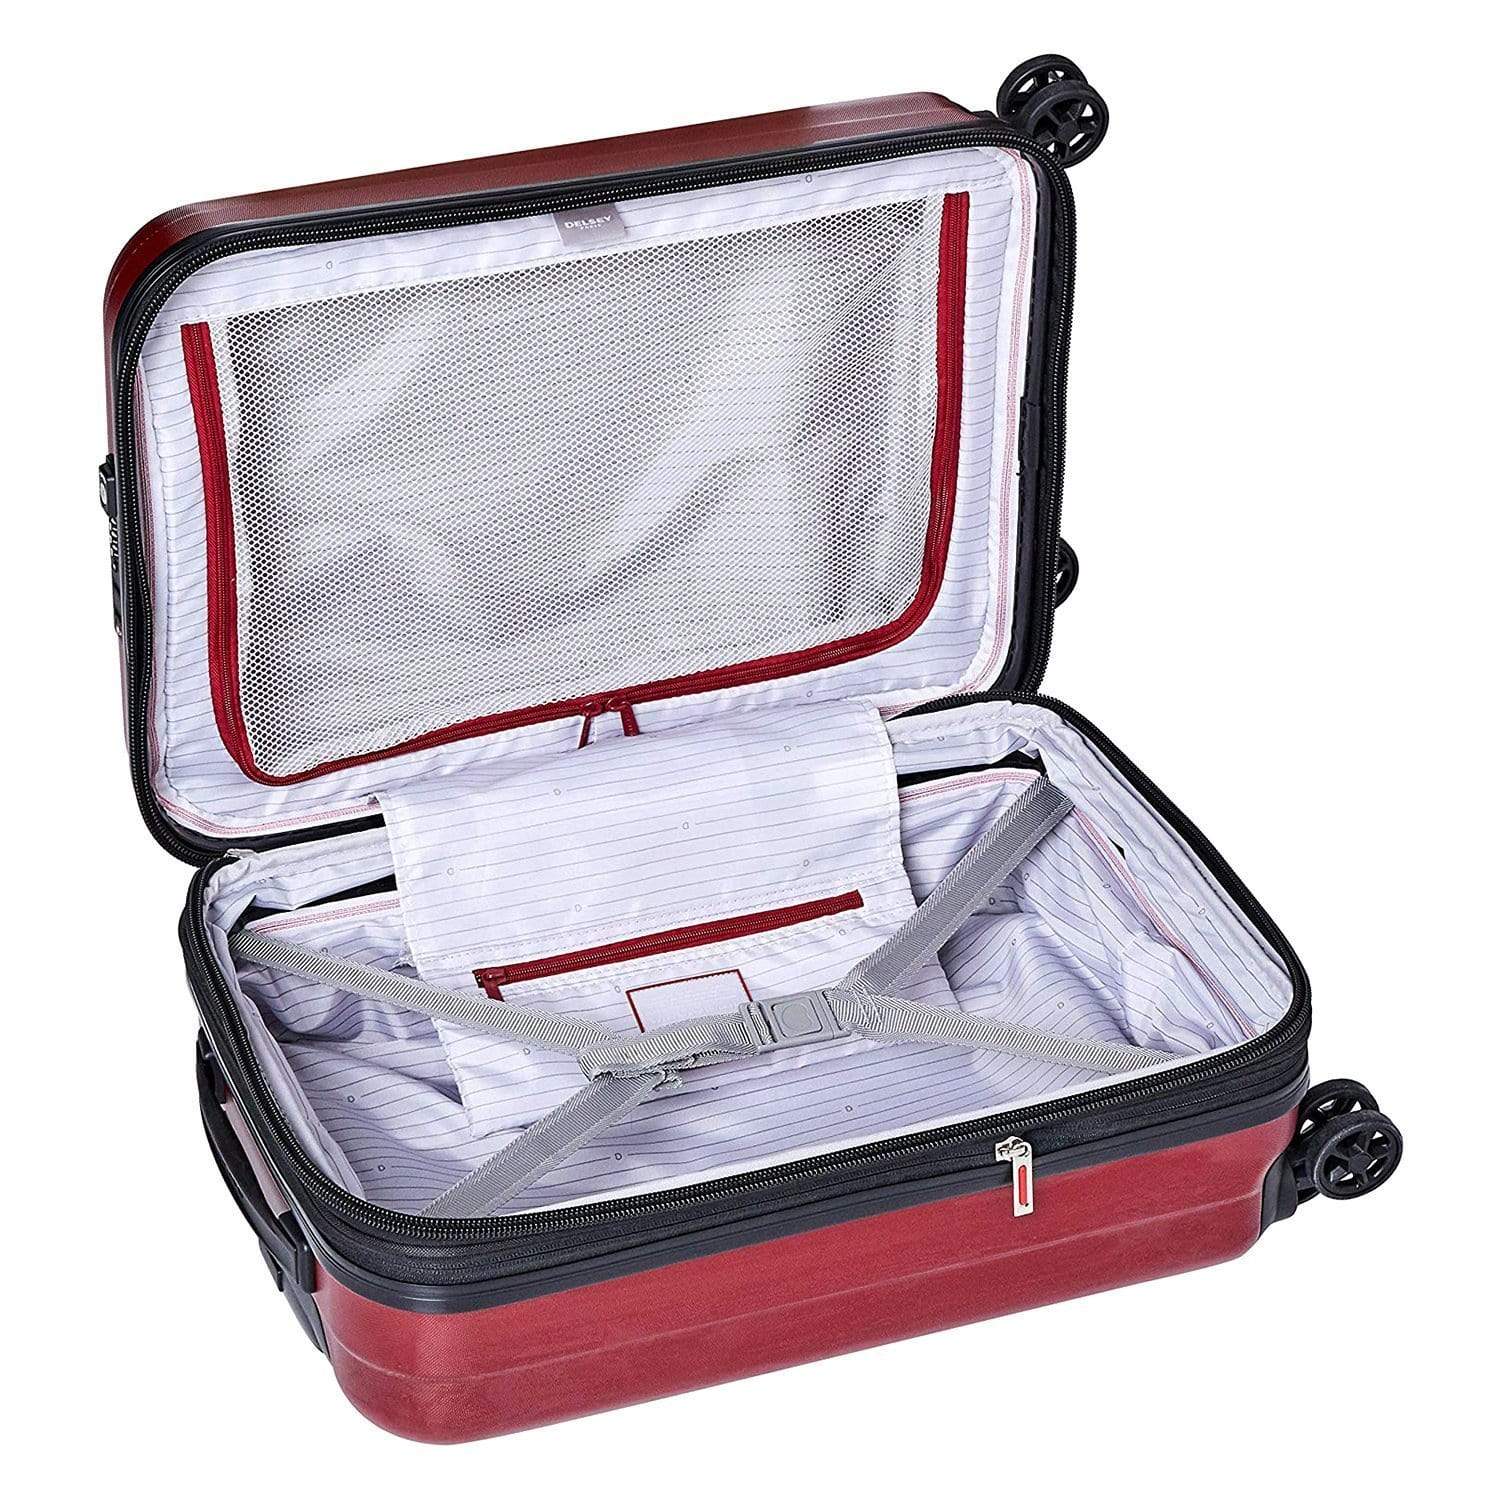 Delsey Segur 2.0 4 Double Wheel Expandable Cabin Trolley Bag - Red, 55 cm - 00205880404 RED - Jashanmal Home